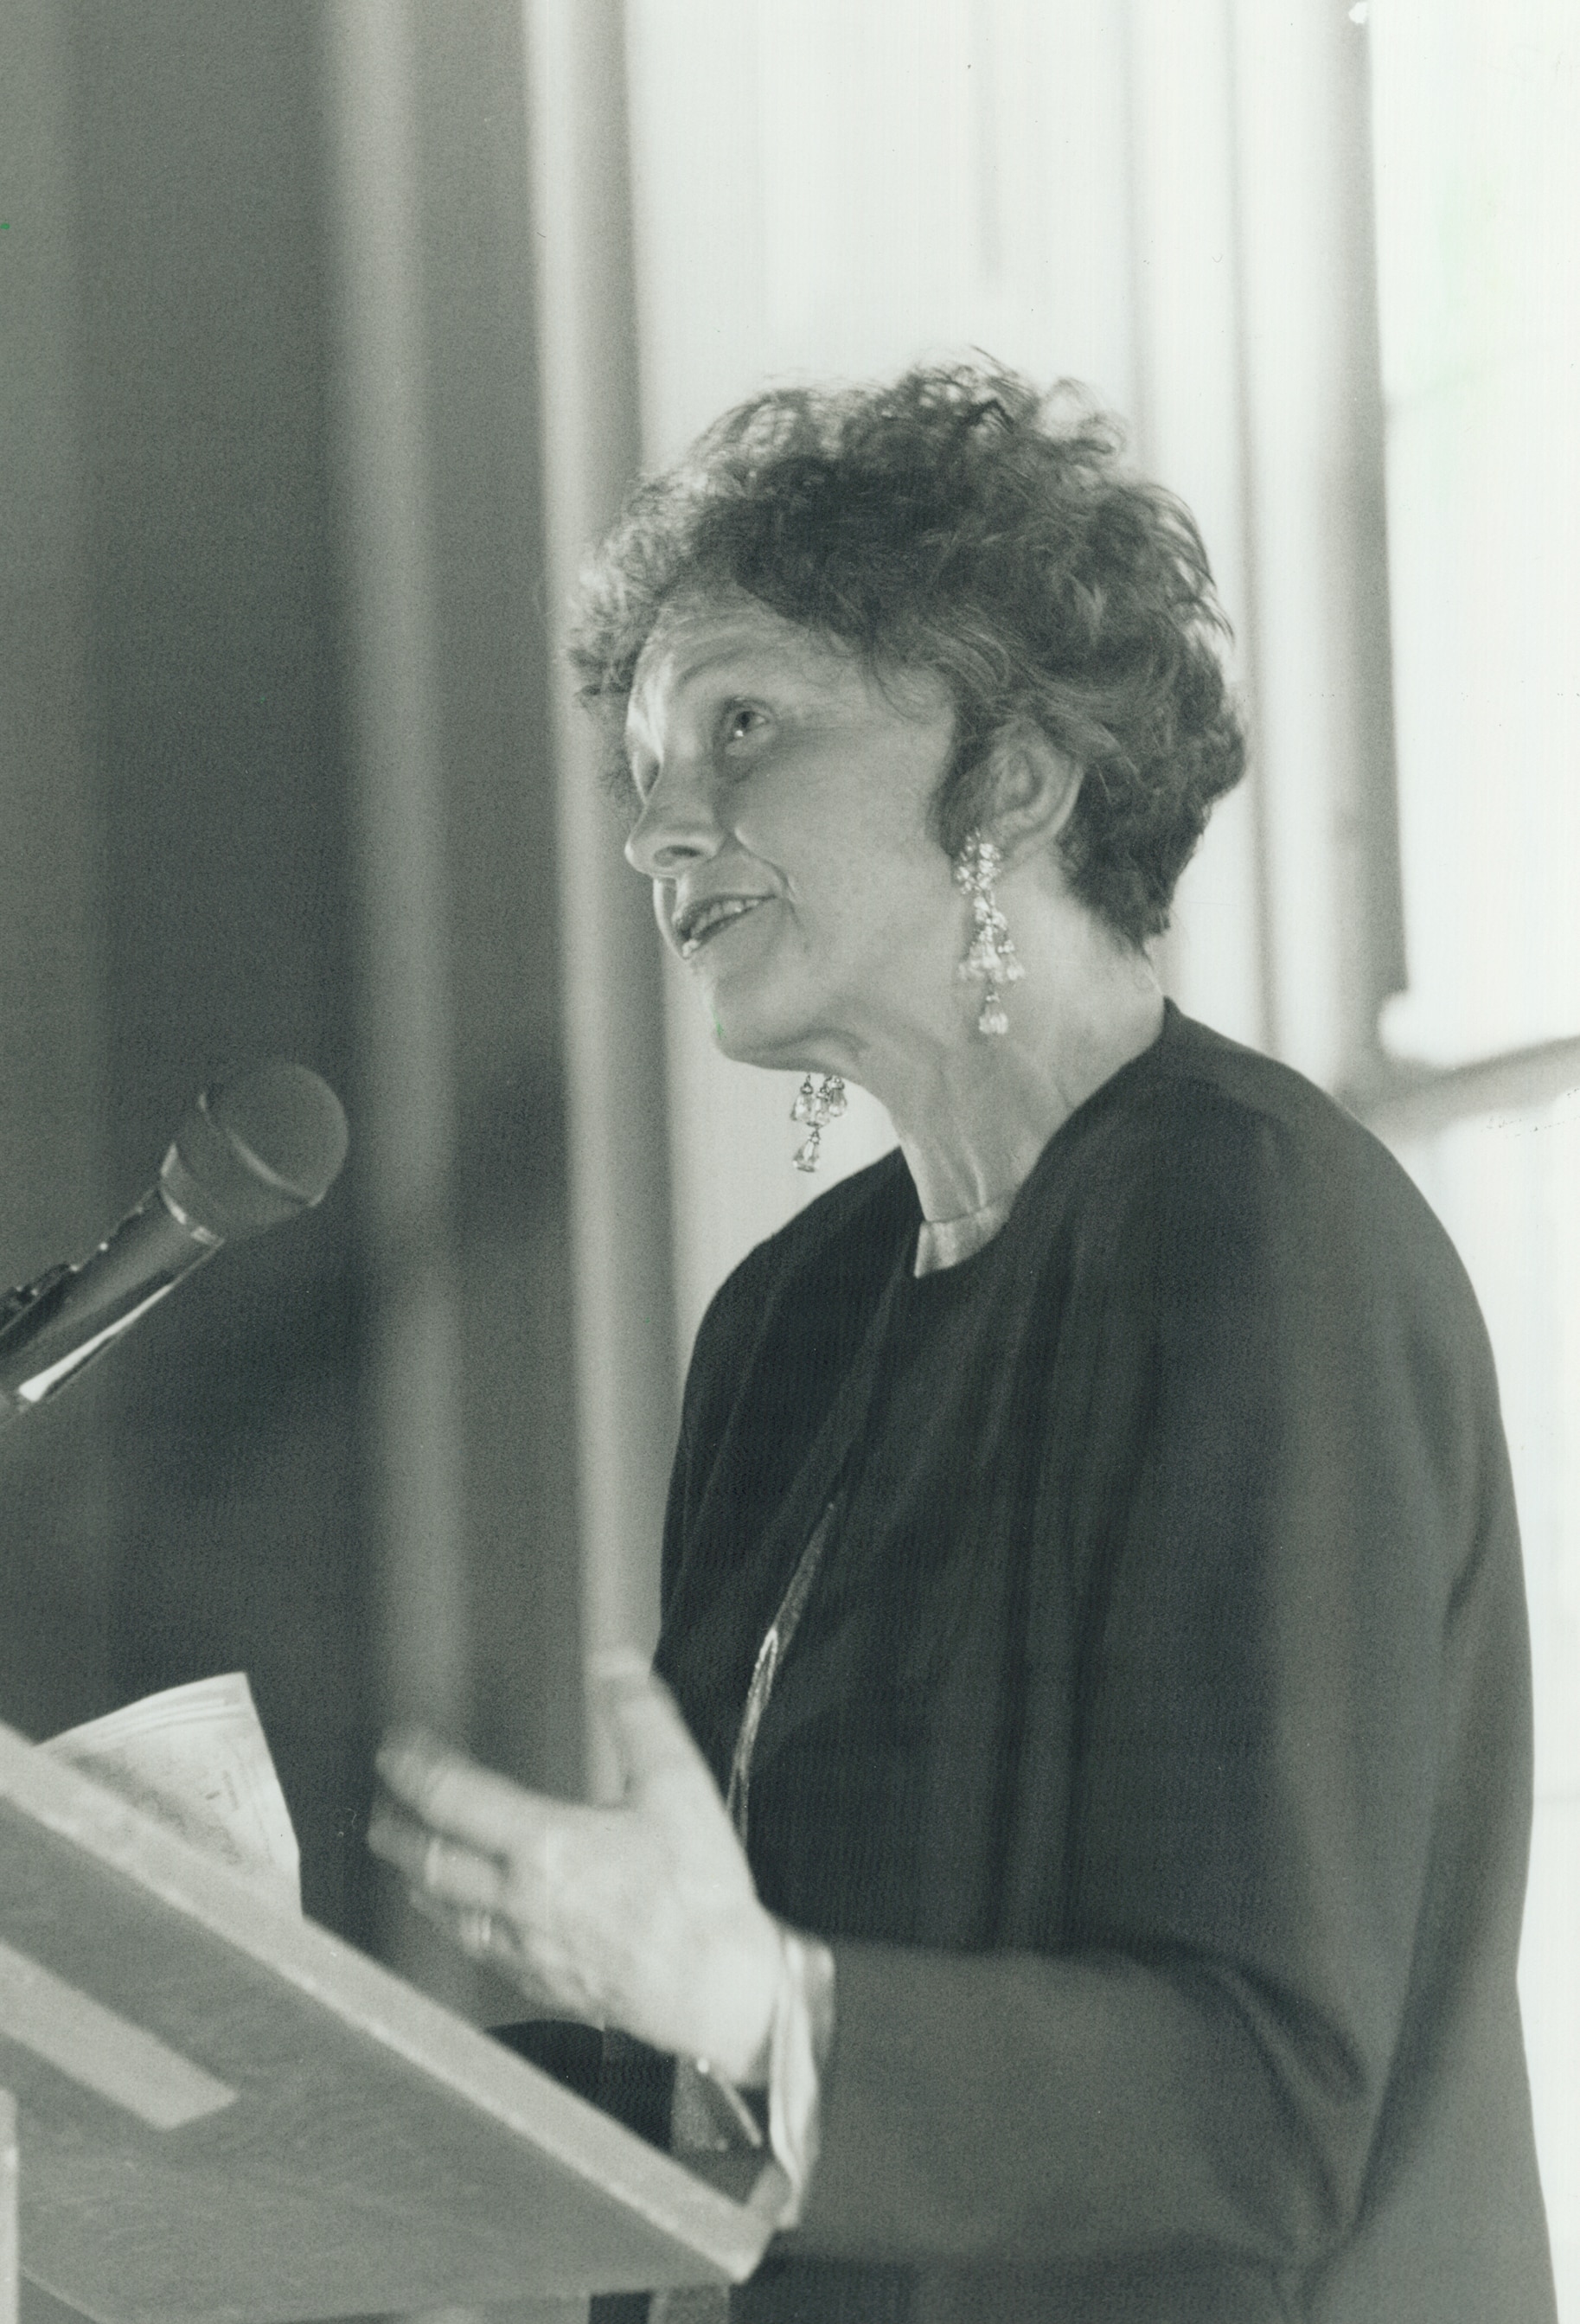 A black and white photograph of a woman speaking at a podium 